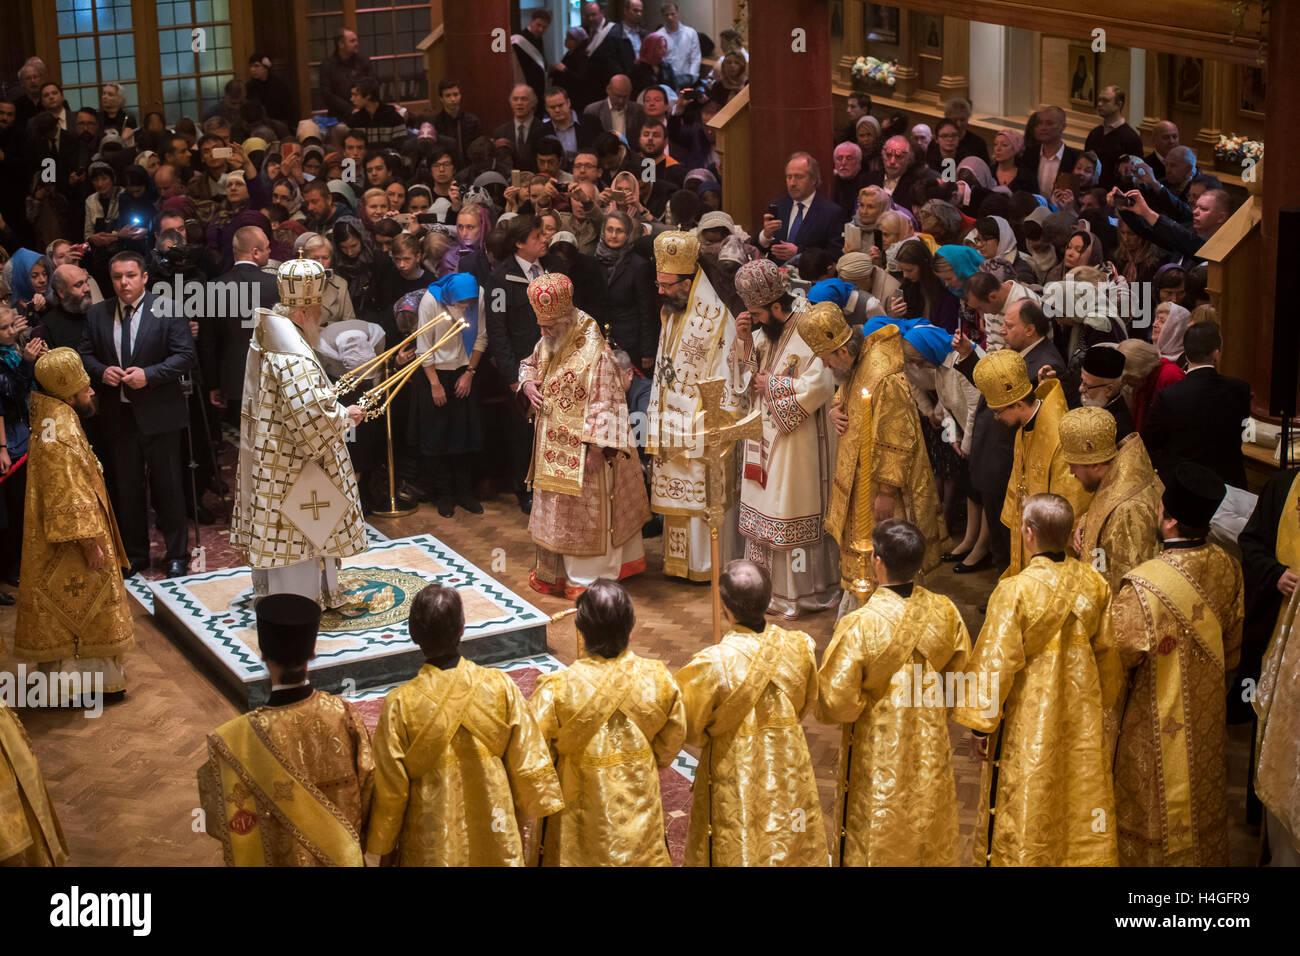 Kensington, London, UK. 16th Oct, 2016.  The consecration of the Cathedral of the Dormition and All Saints. Divine Liturgy. Sanctification of the bells and frescoes on the outer wall of the church. This is part of The pastoral visit of His Holiness Patriarch Kirill of Moscow and All Russia to the United Kingdom.Pic Shows His Holiness Patriarch Kirill entering the Cathedral and having his robes changed Credit:  PAUL GROVER/Alamy Live News Stock Photo